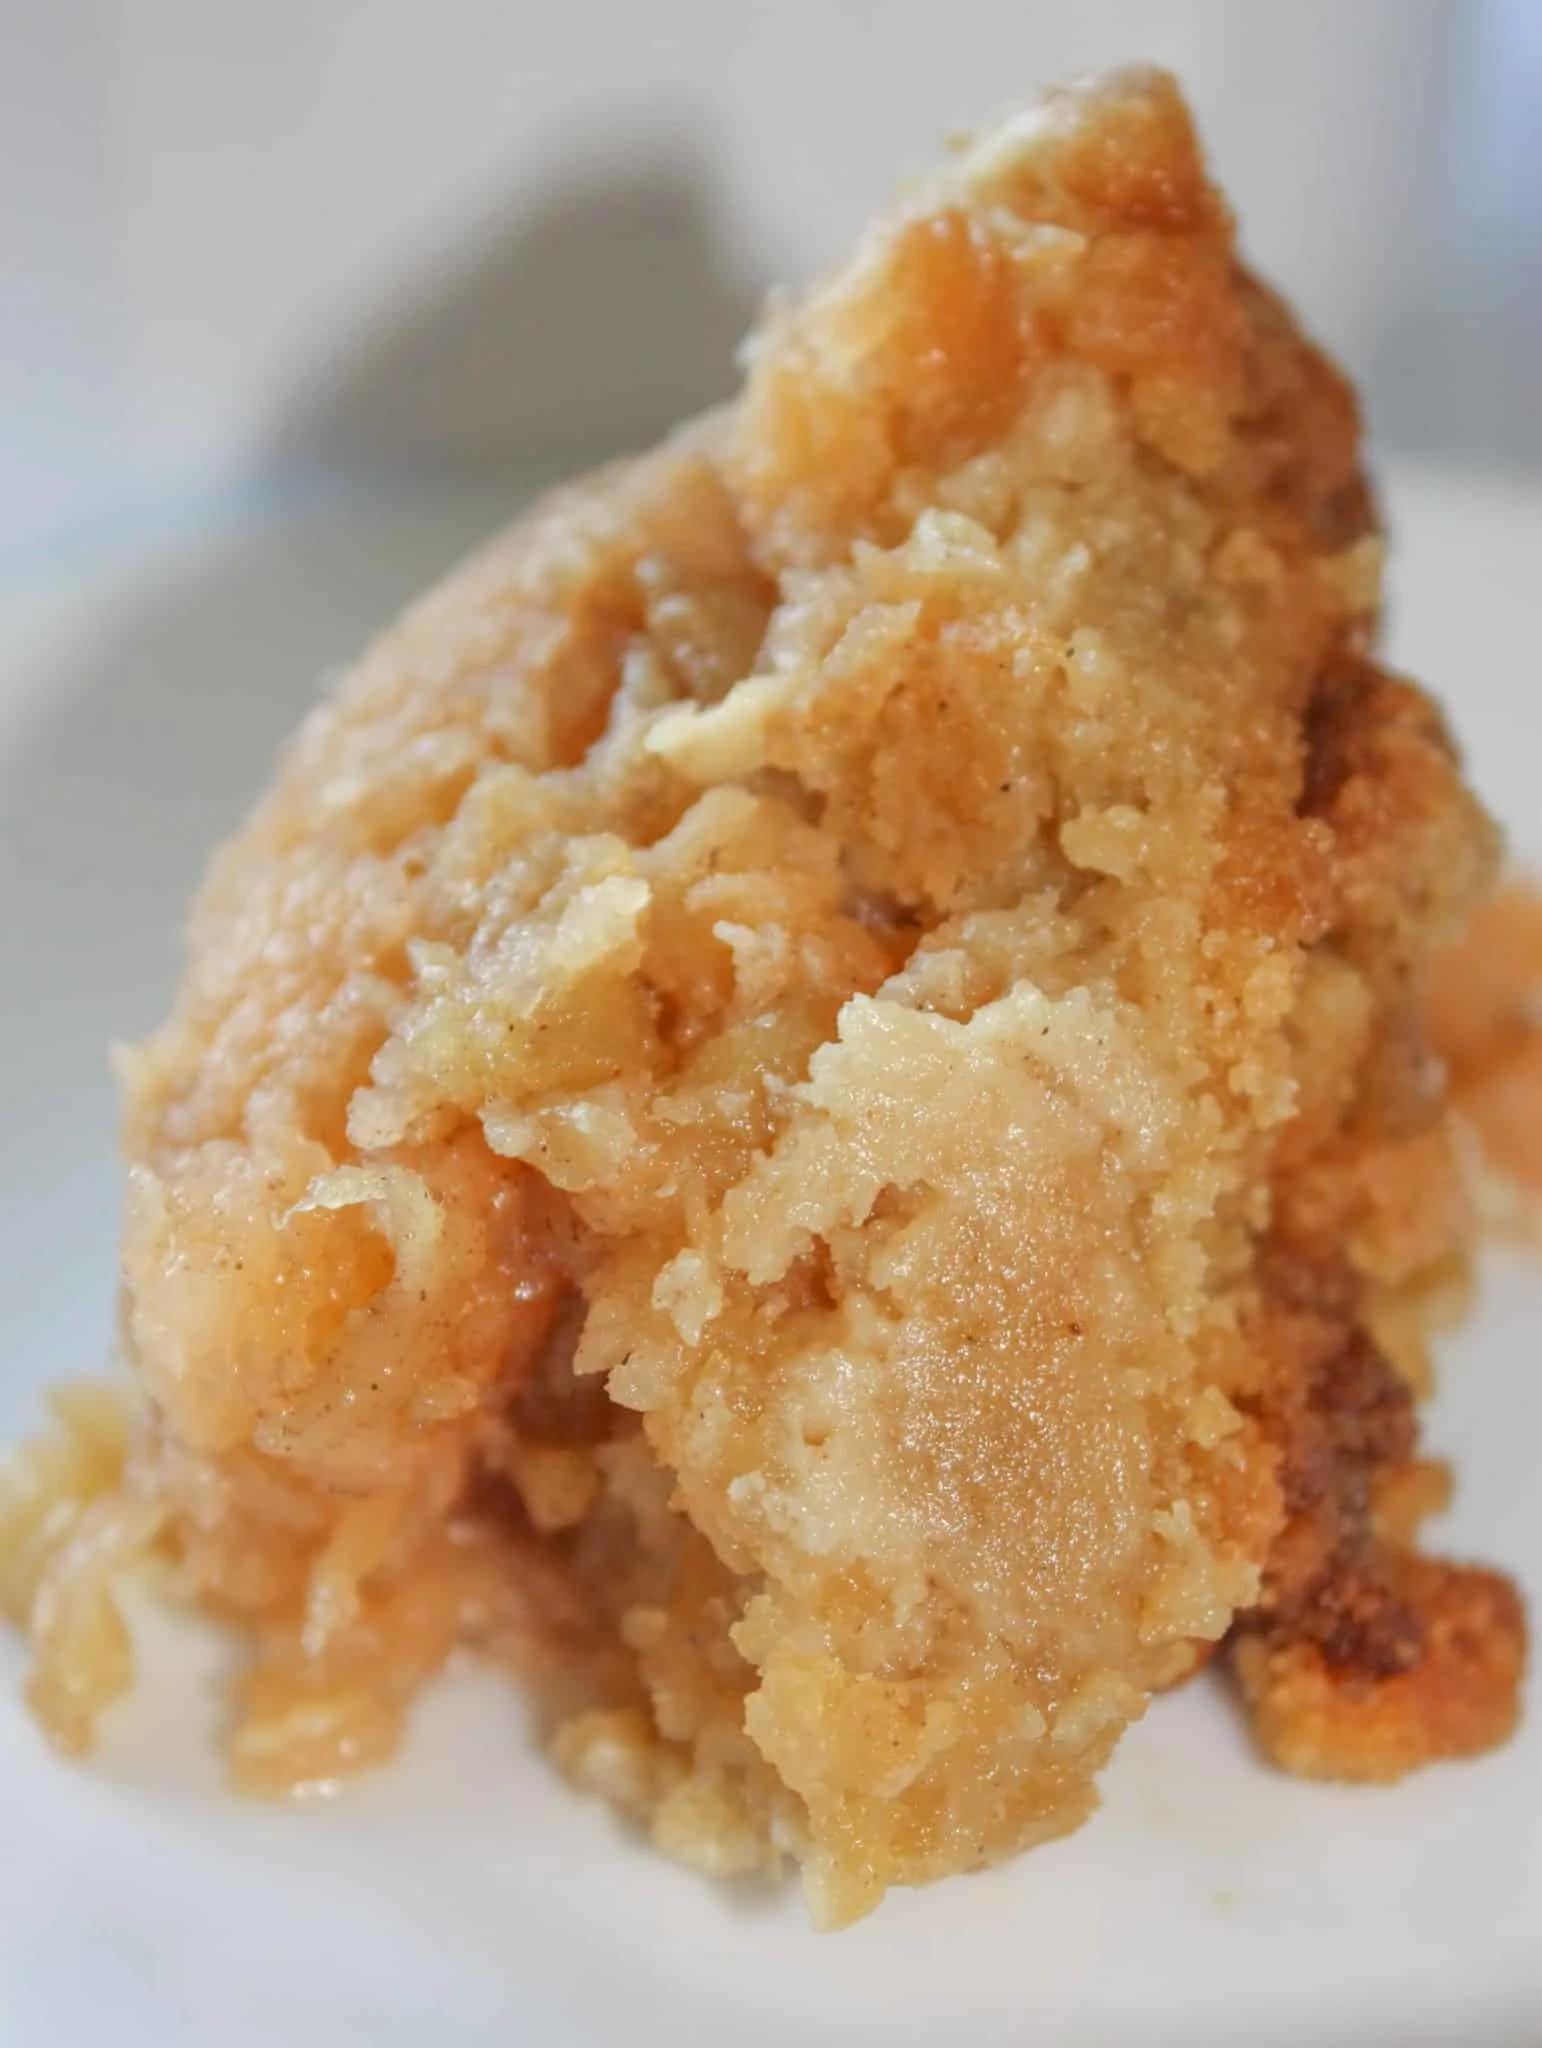 The perfect way to get everyone at your holiday feast to enjoy turnip, including the little ones, is to prepare and serve this Turnip Apple Crumble.